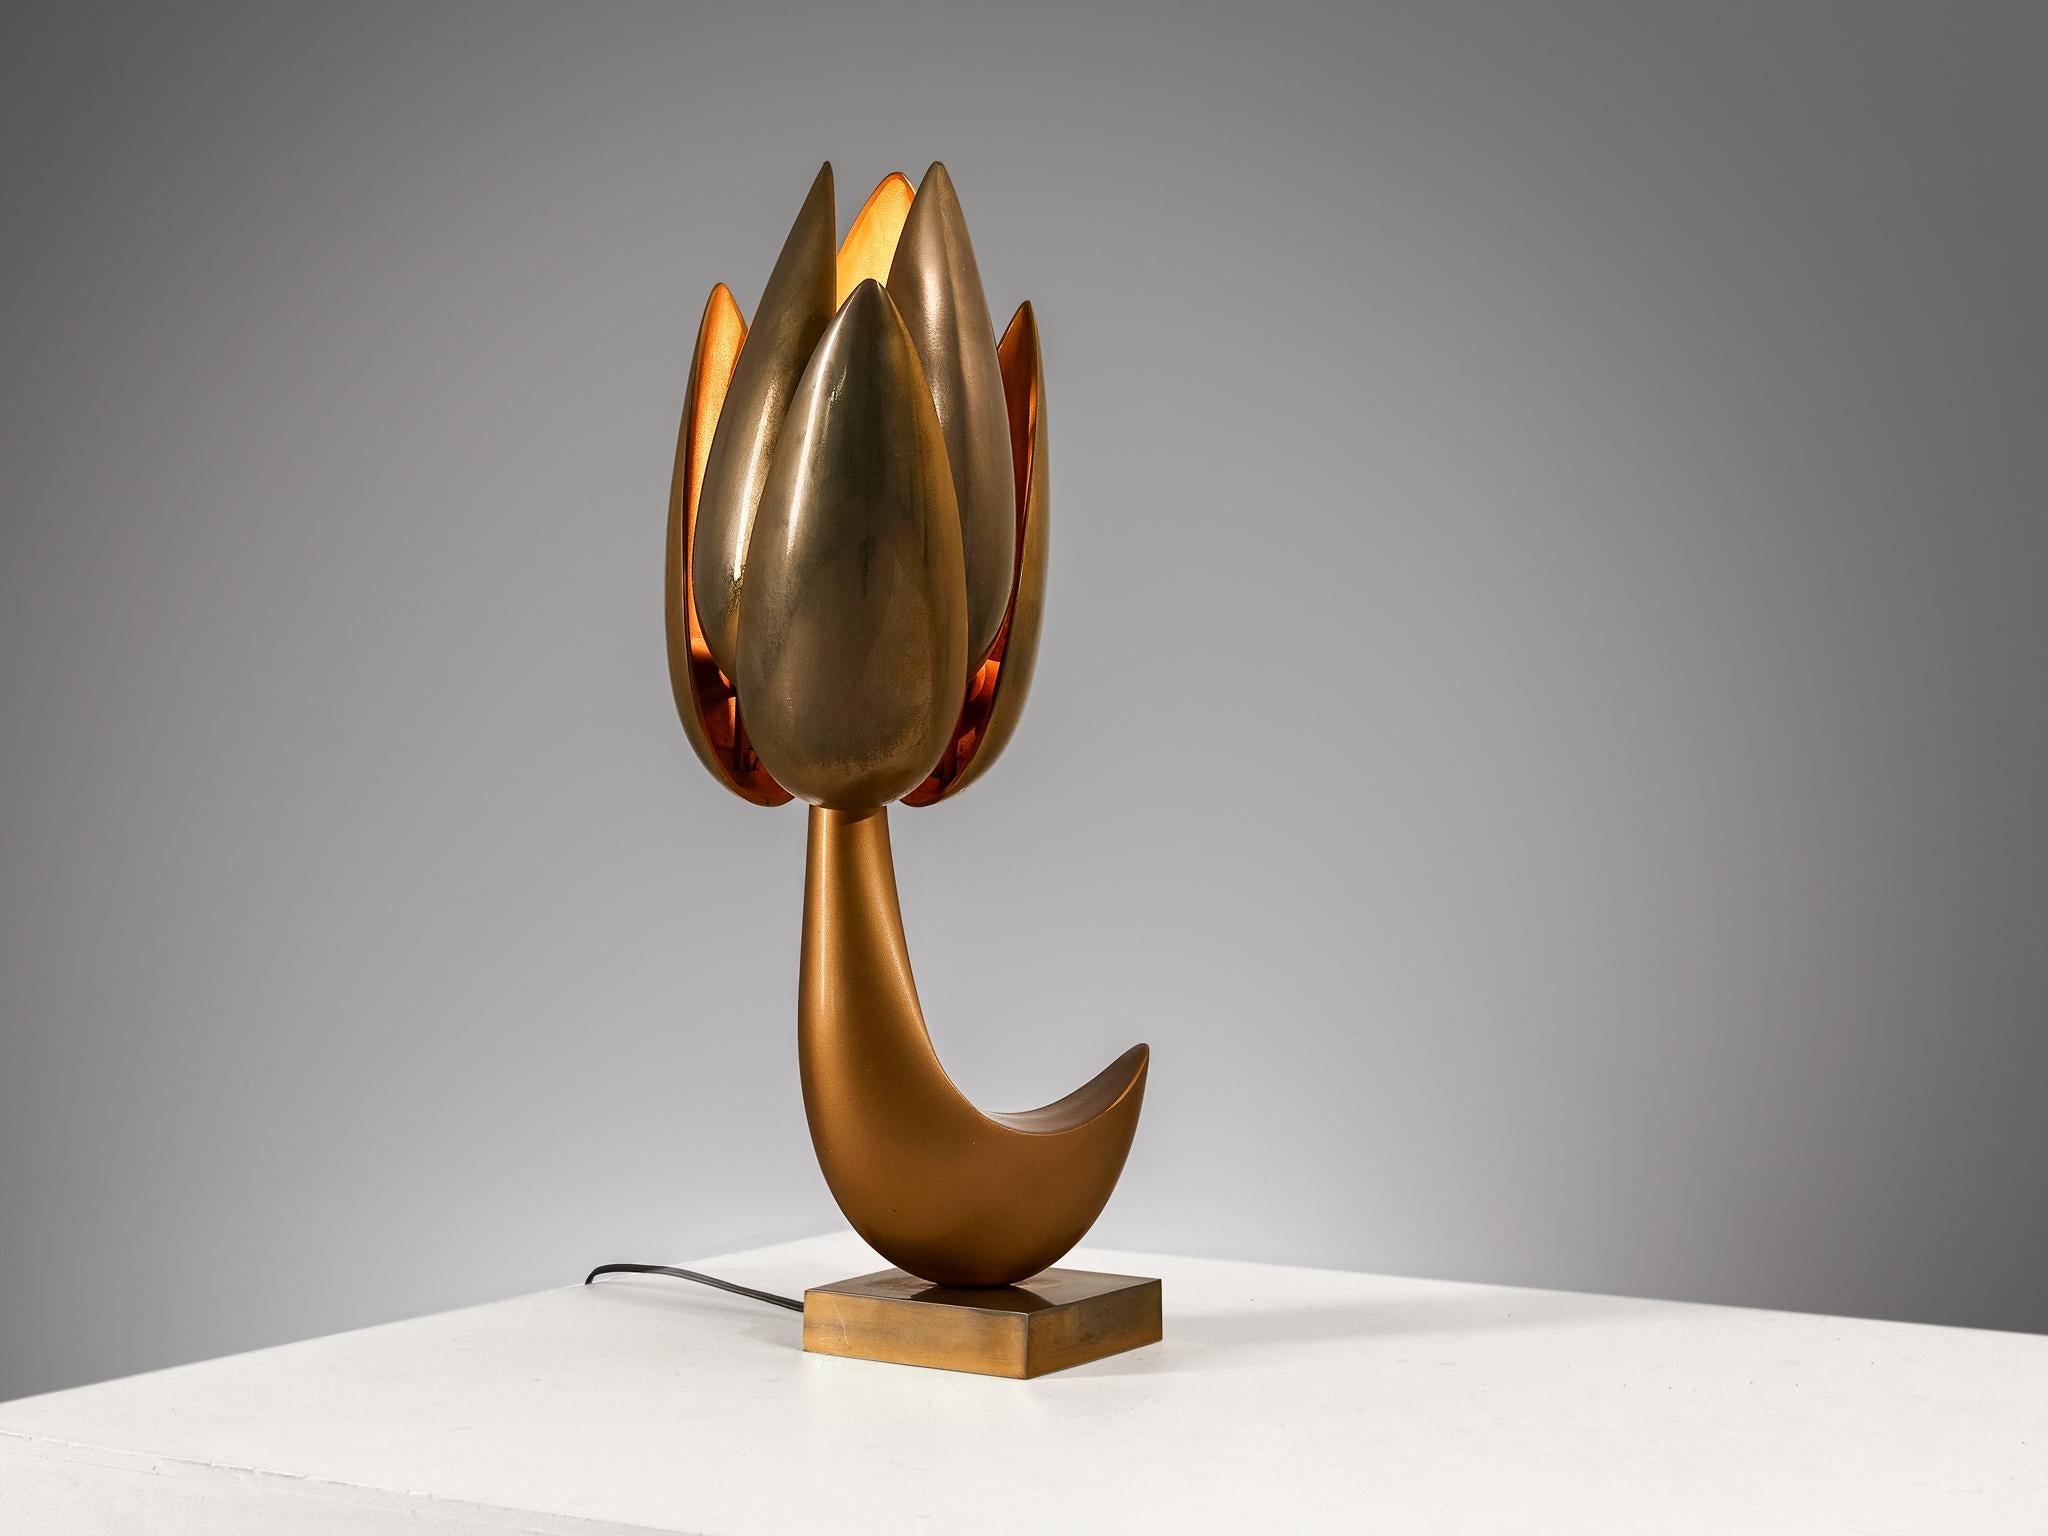 Atelier Michel Armand, 'Fleur' table lamp, brass, gold coloured anodised aluminium, Canada, 1970s

This sculptural lamp is crafted by Atelier Michel Armand. Its abstract form is that of a flower, or more specifically, a tulip, meticulously crafted